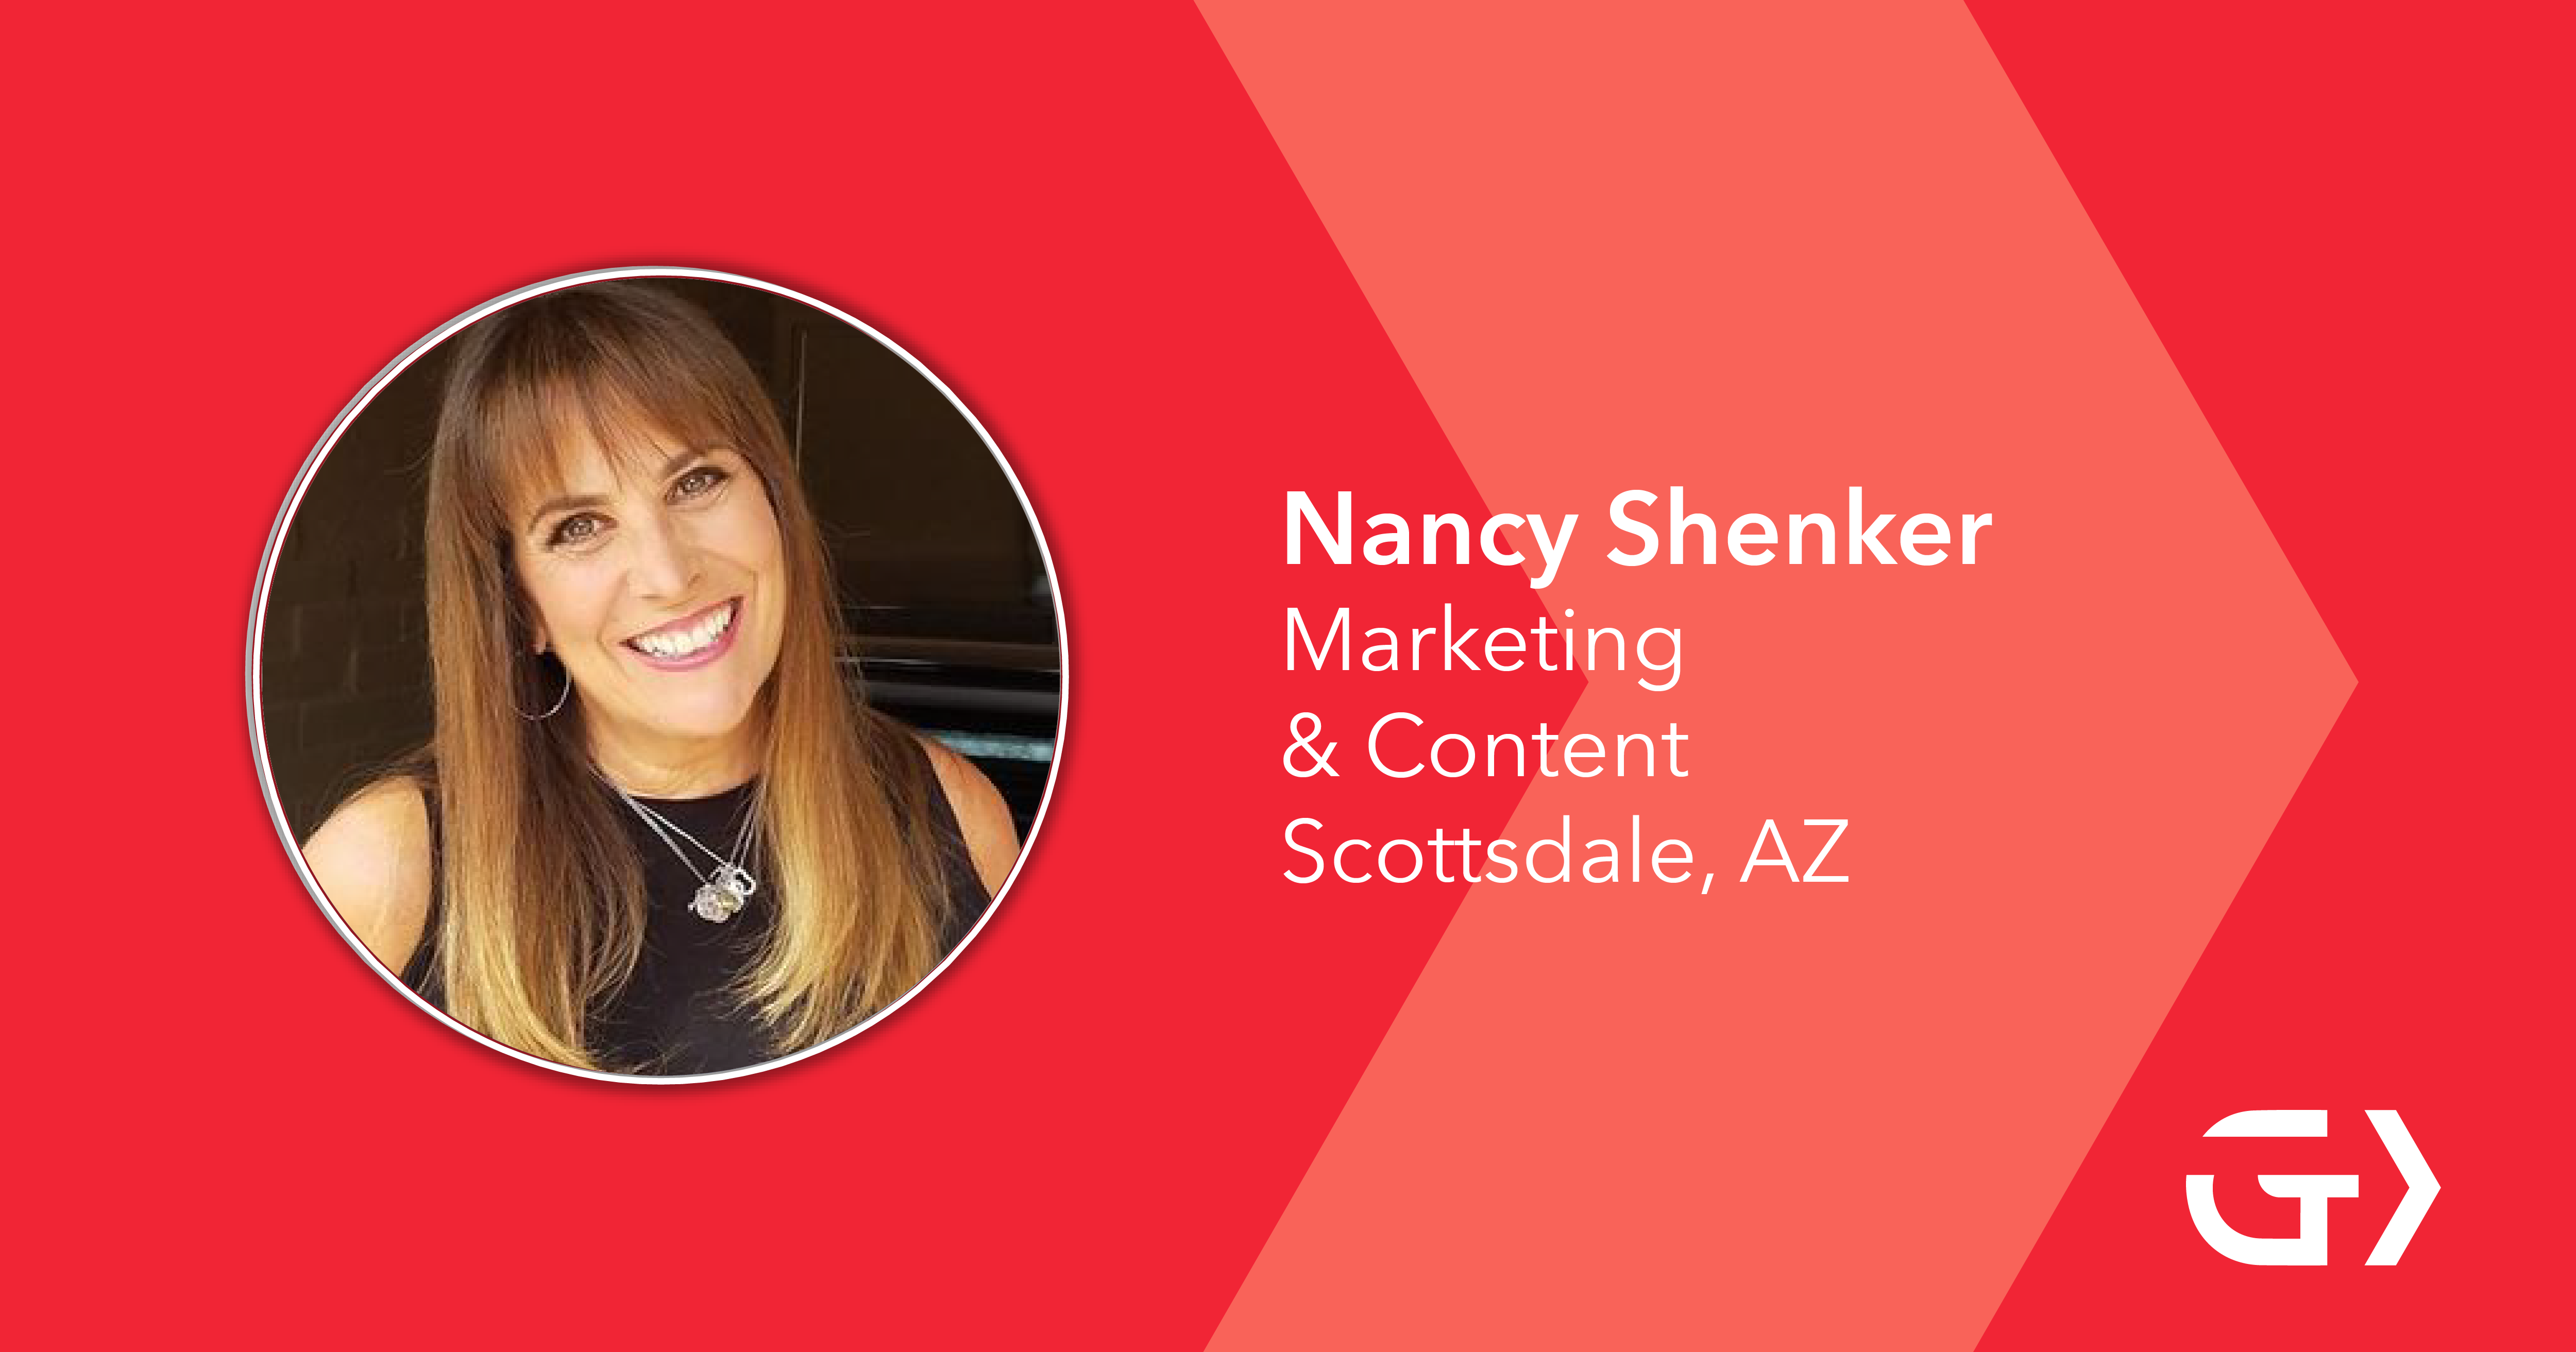 Why'd you decide to come to Greater Phoenix? Nancy Shenker said she moved to the region for the fast-growing tech scene and hospitality industry.